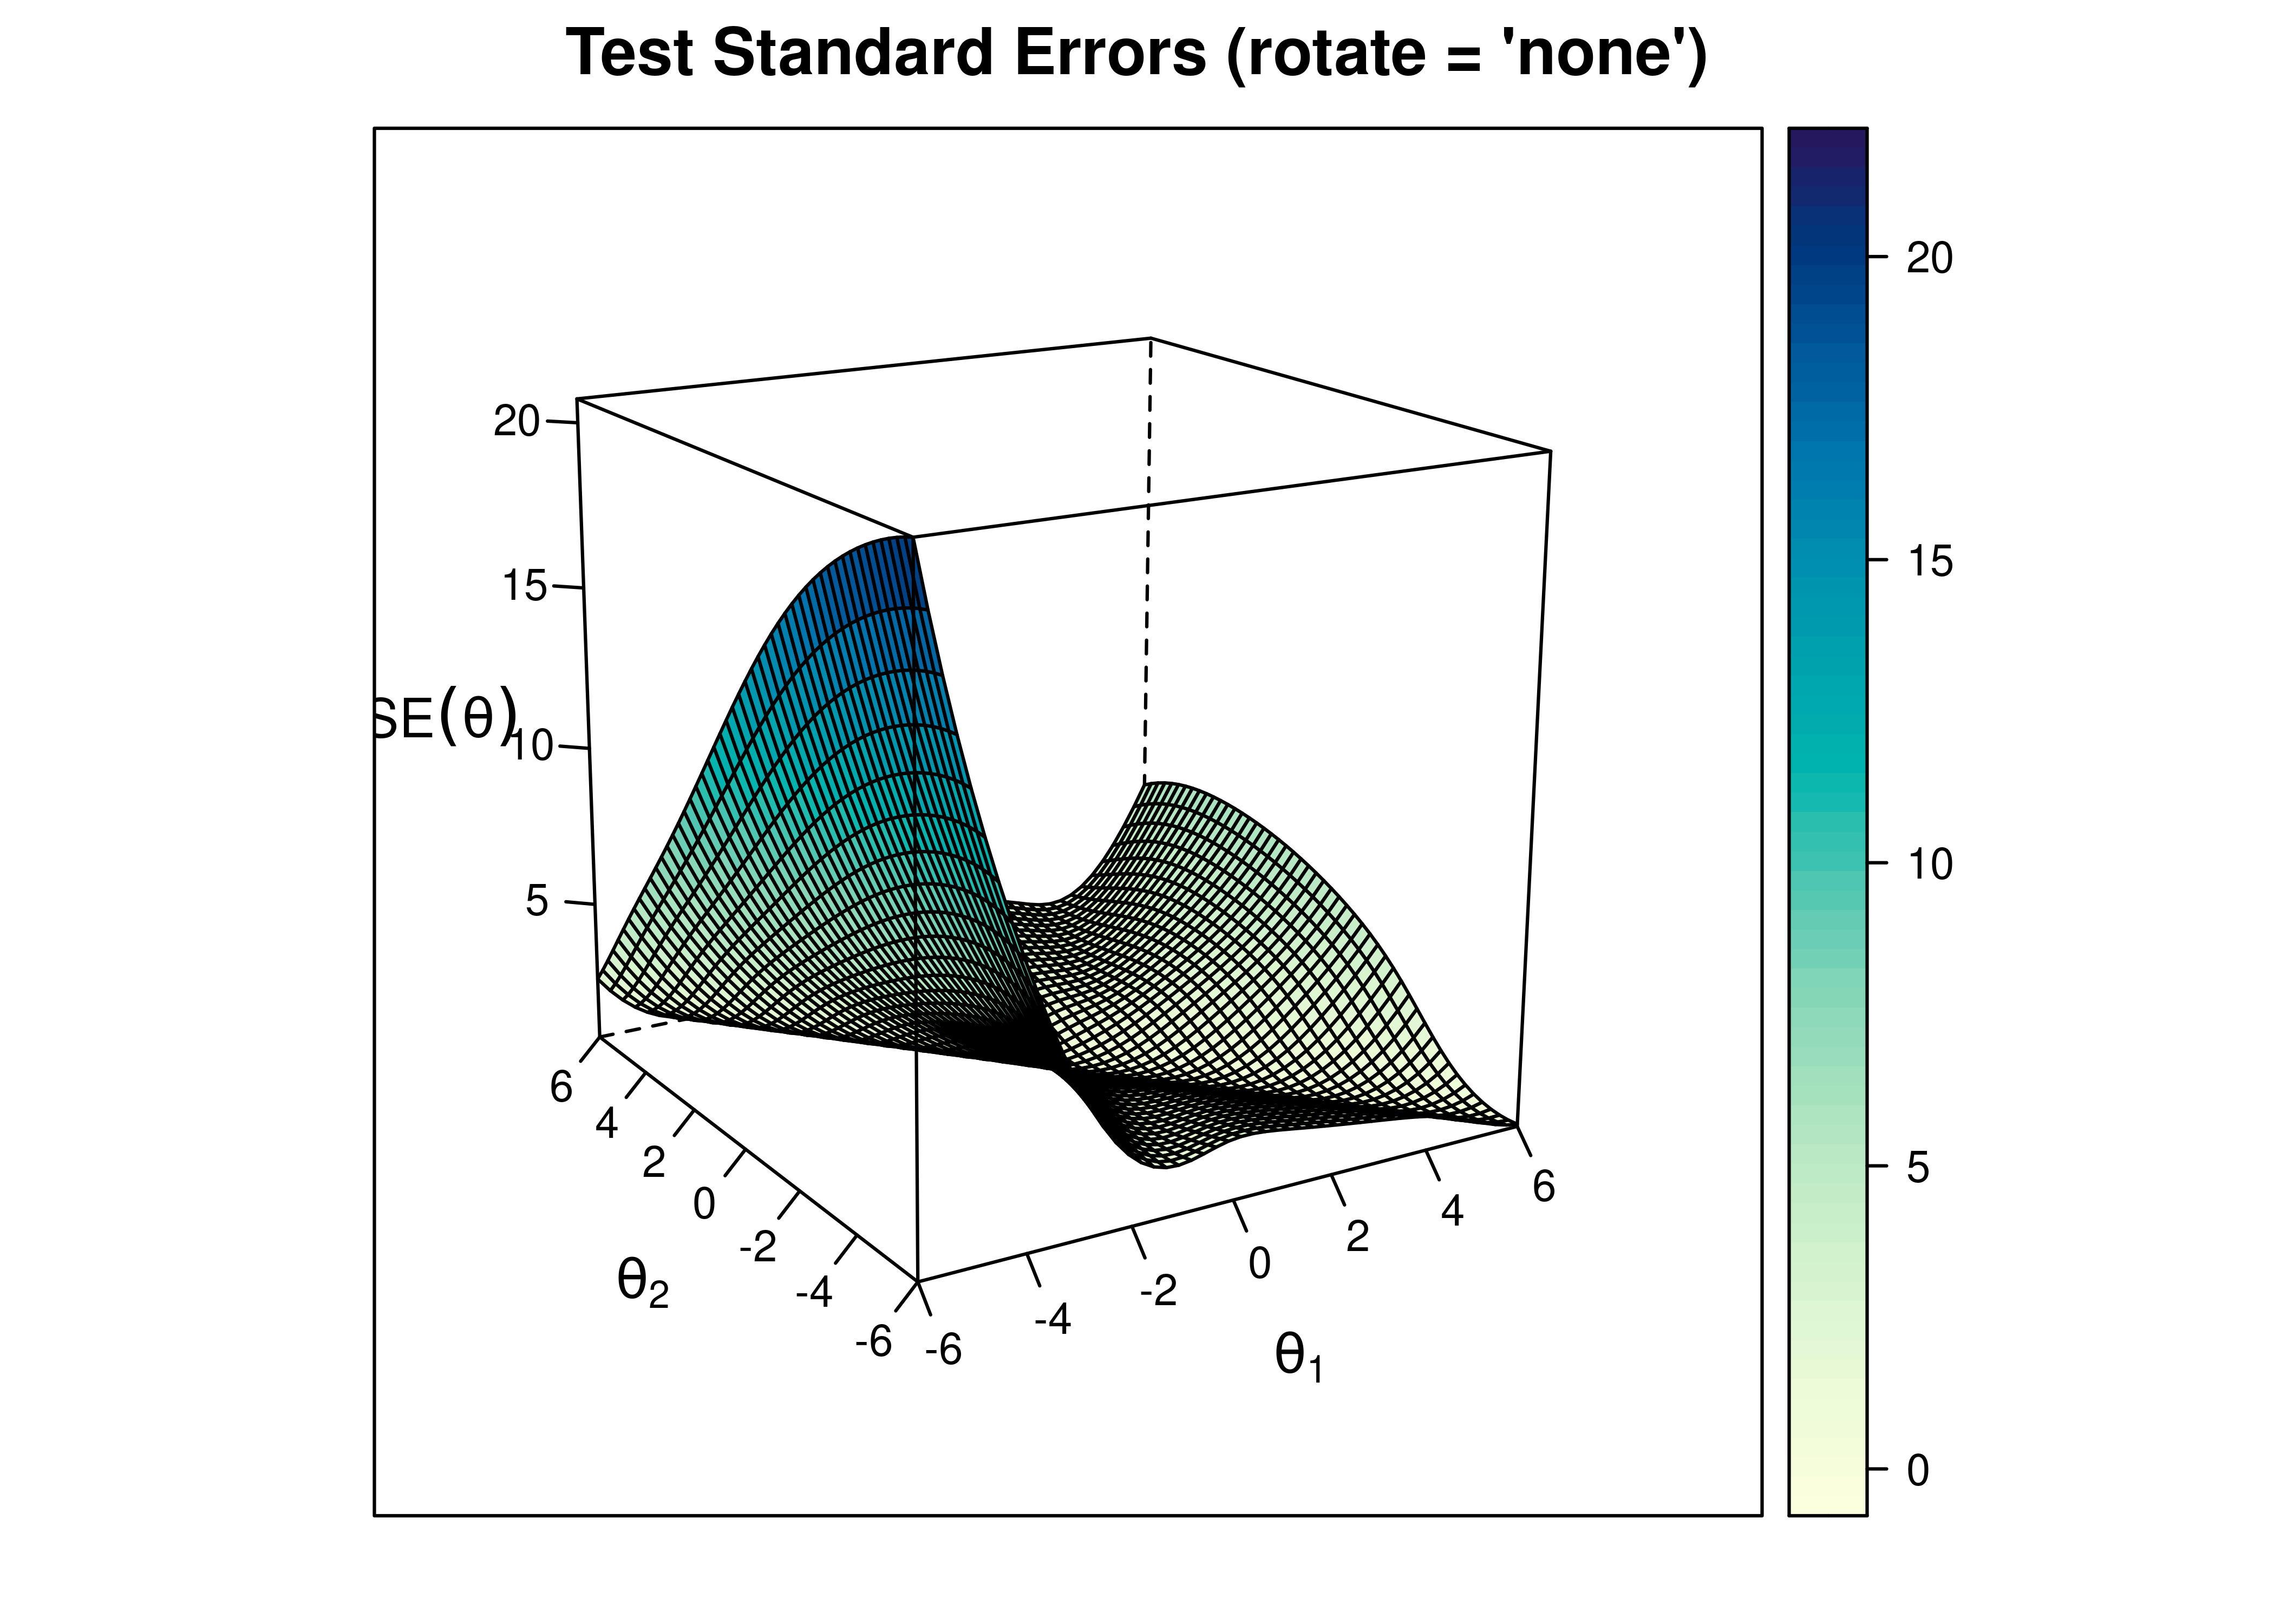 Test Standard Error of Measurement From Two-Parameter Multidimensional Item Response Theory Model.